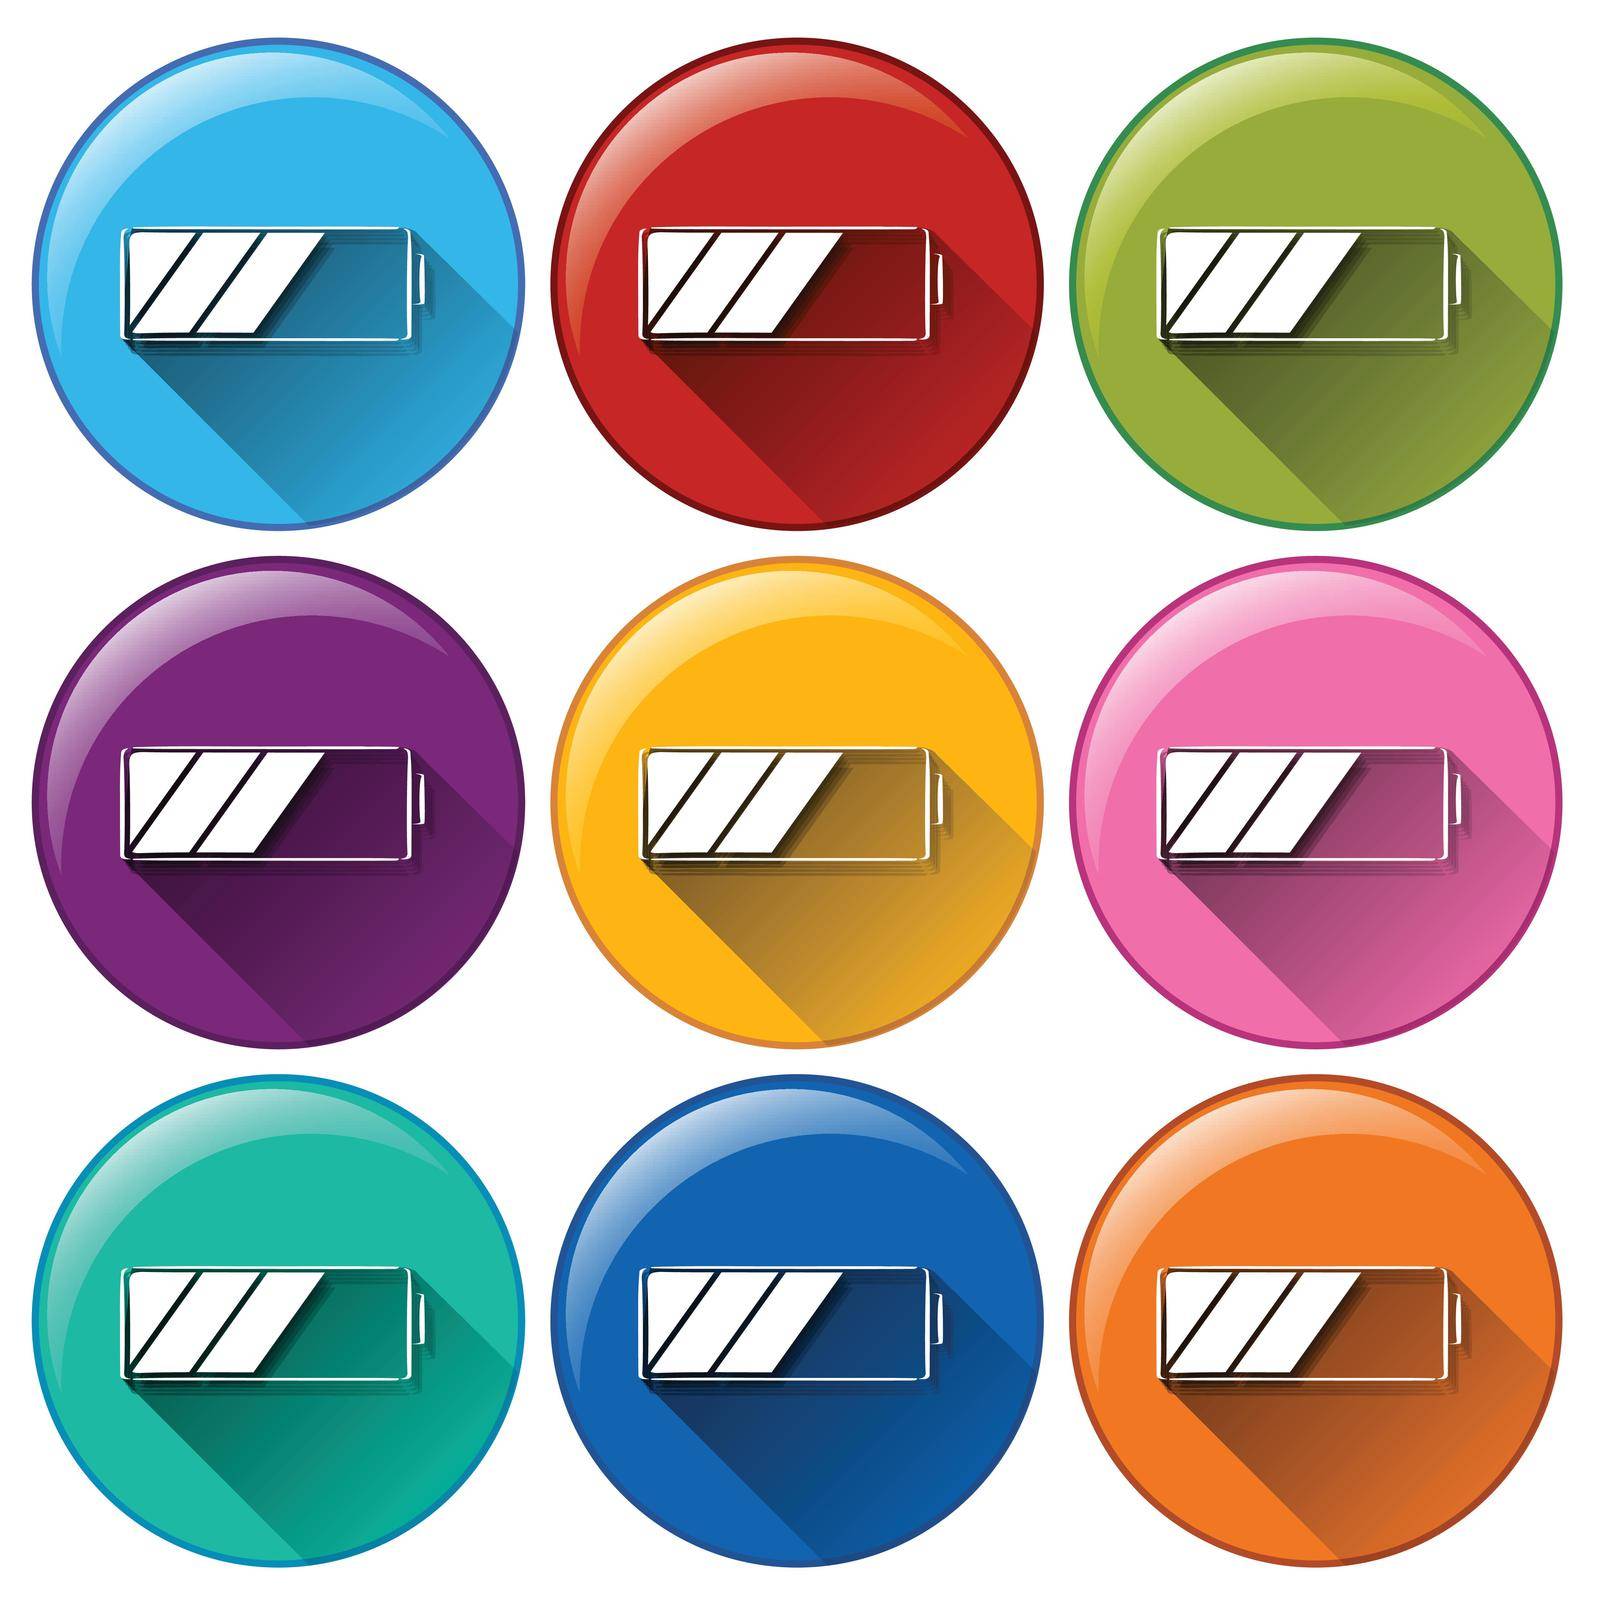 Illustration of the rounded icons with batteries on a white background